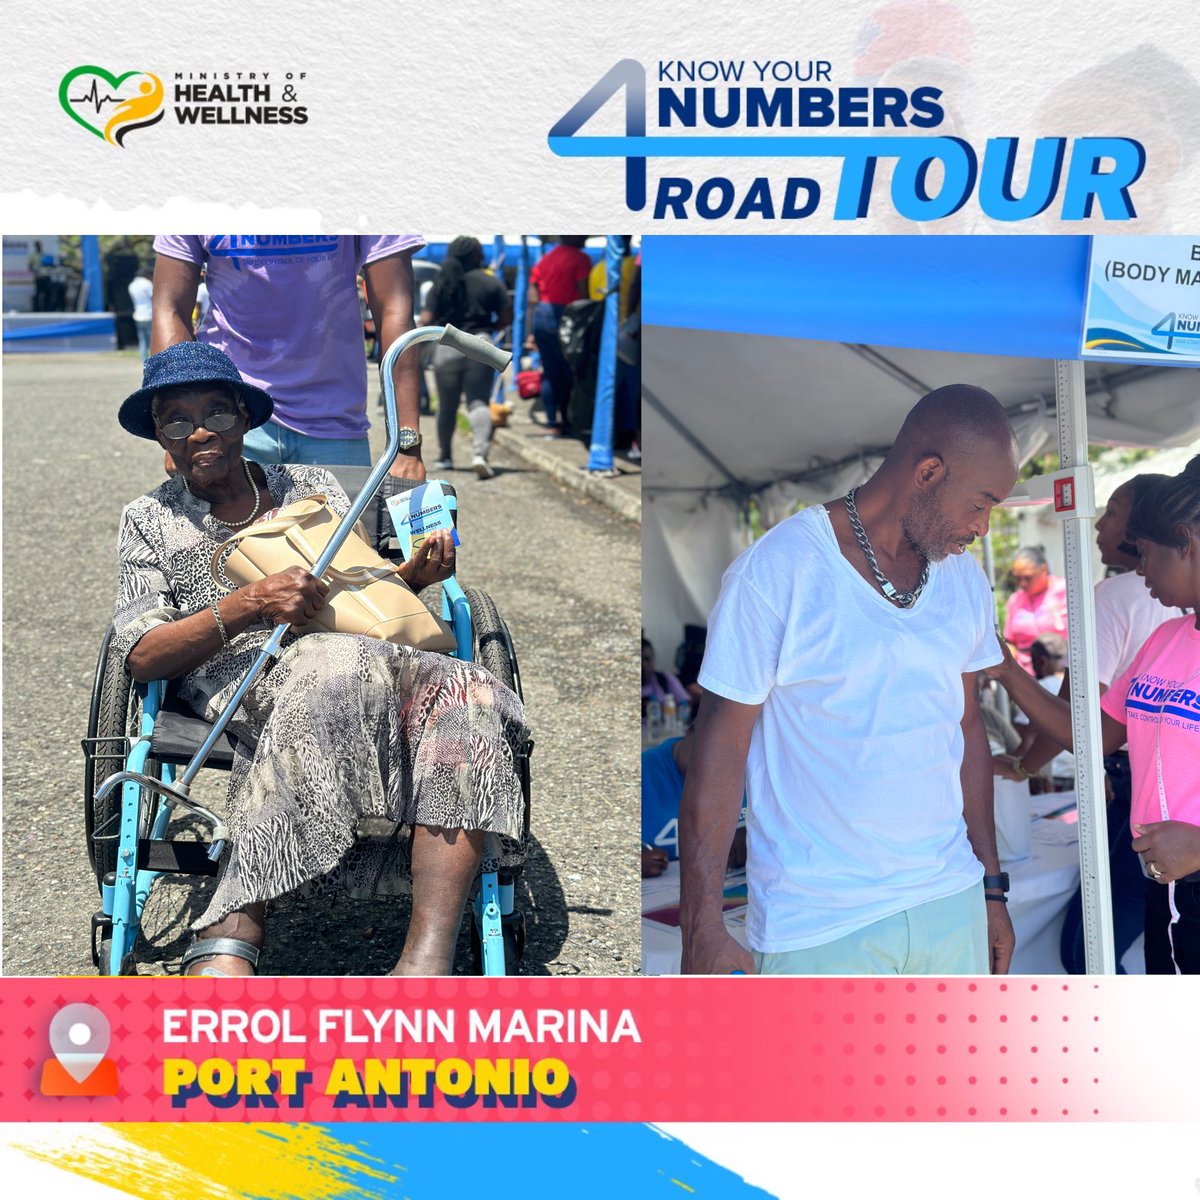 Happening now

Know your numbers, shape your health: Regular BMI screenings for a healthier you.

📍Know Your Numbers Road Tour

#knowyournumbers